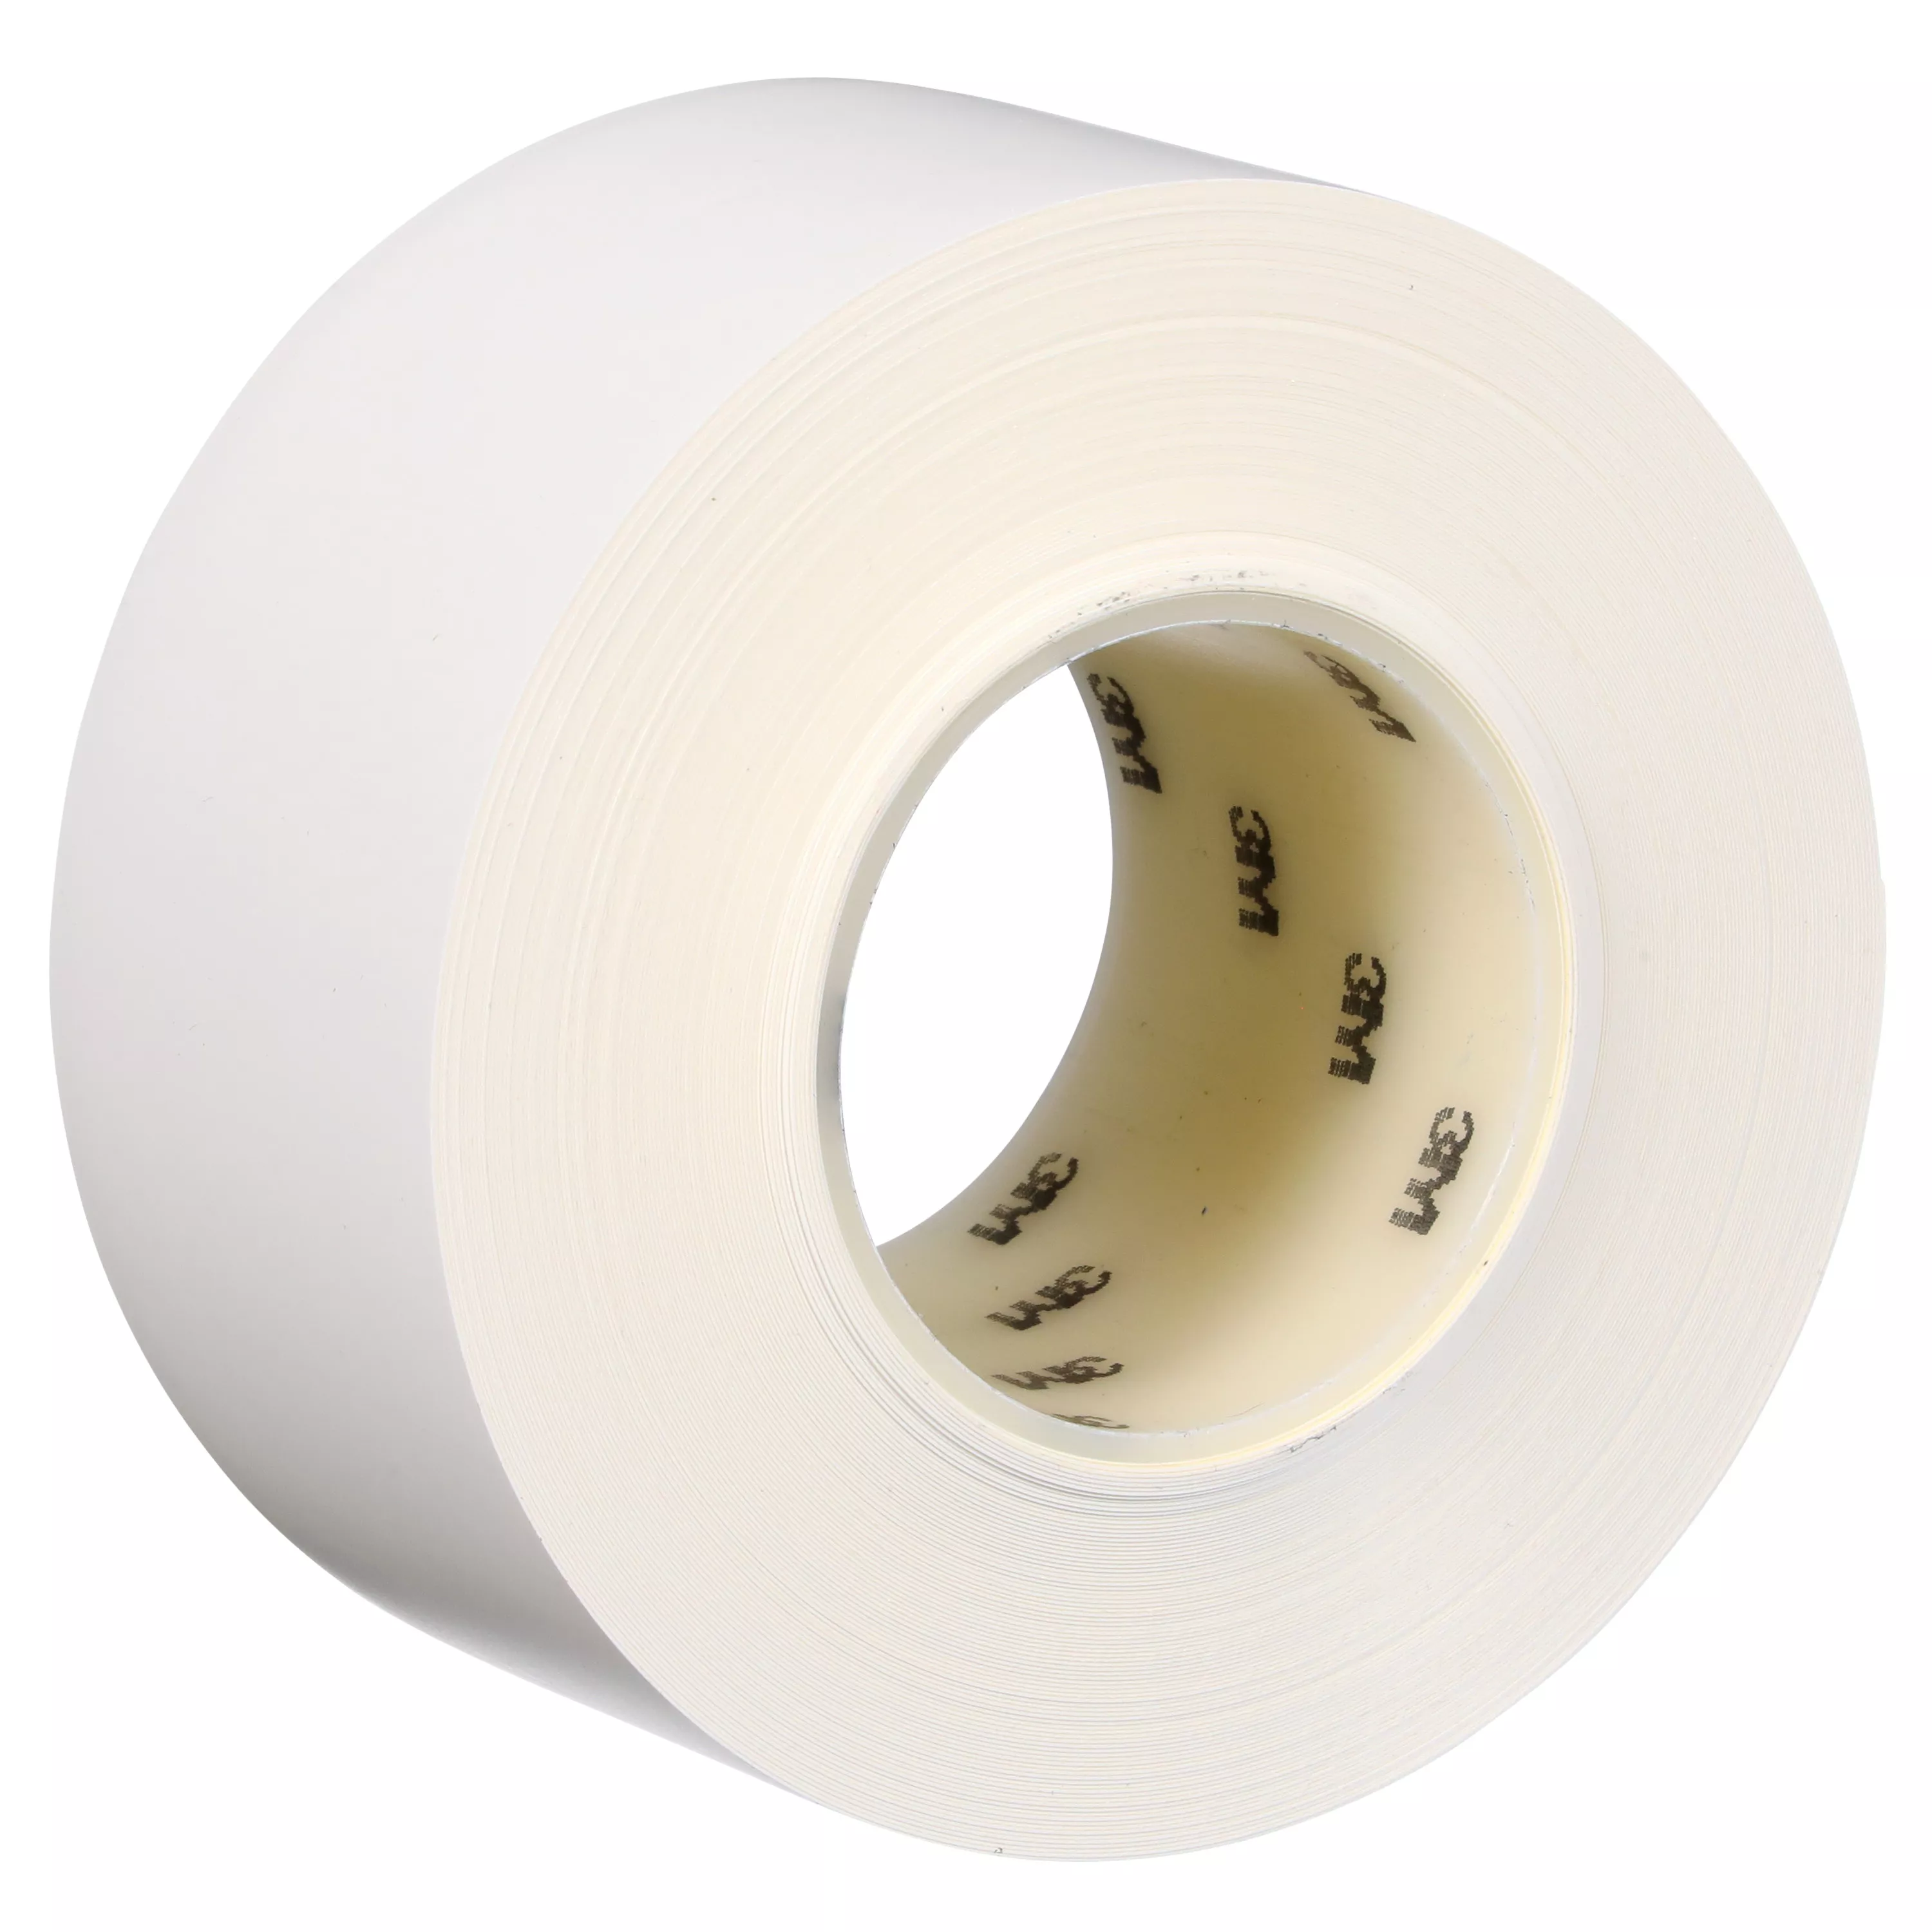 3M™ Durable Floor Marking Tape 971, White, 3 in x 36 yd, 17 mil, 4 Rolls/Case, Individually Wrapped Conveniently Packaged